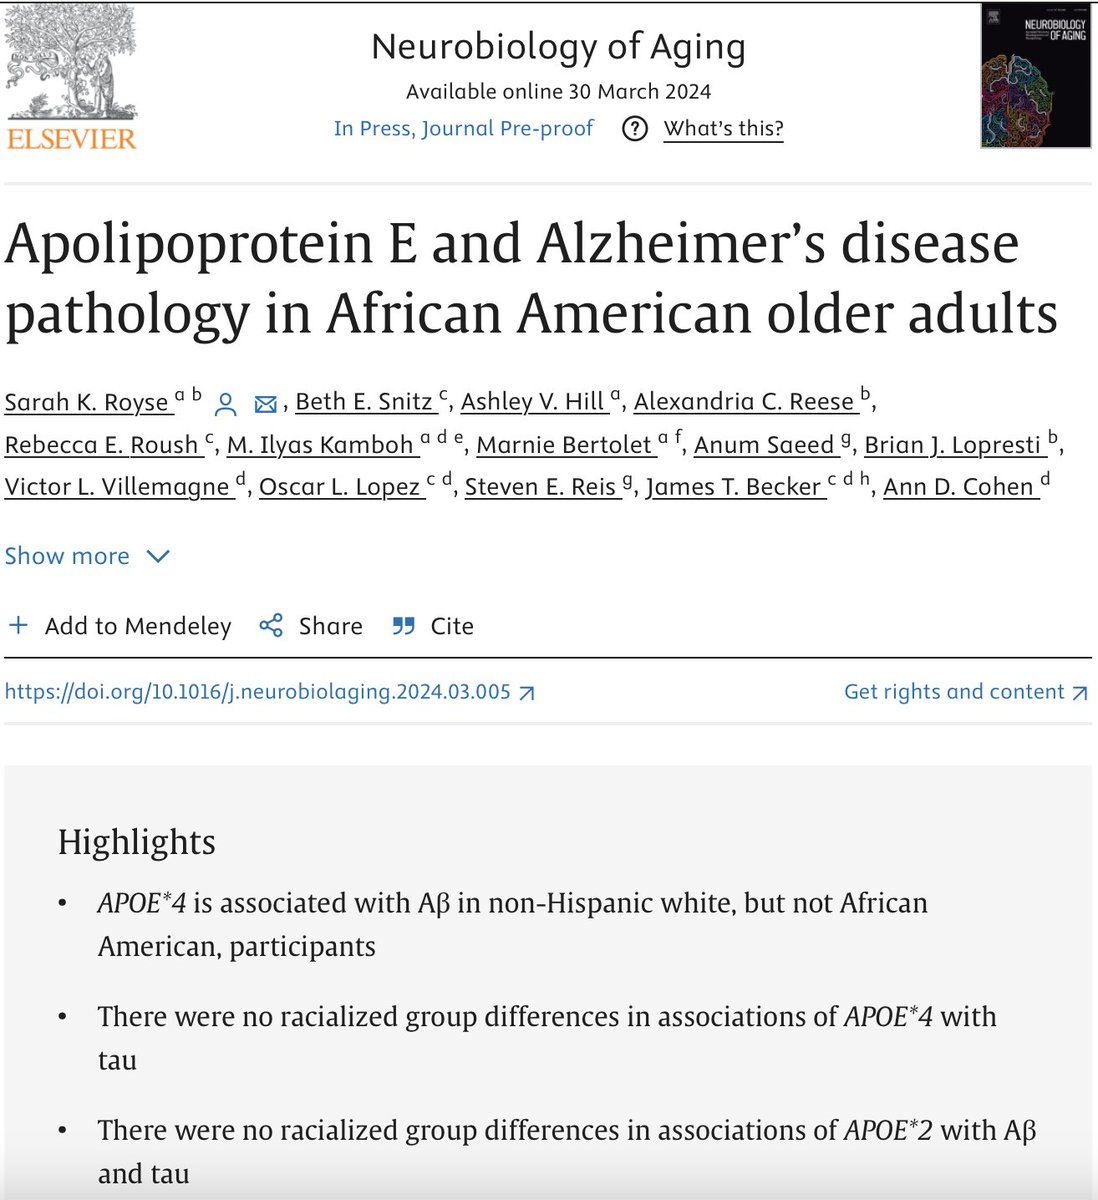 New publication in Neurobiology of Aging: We compare associations of #APOE4 and #APOE2 with brain #amyloid and #tau deposition between African American and non-Hispanic white populations. Link: sciencedirect.com/science/articl…